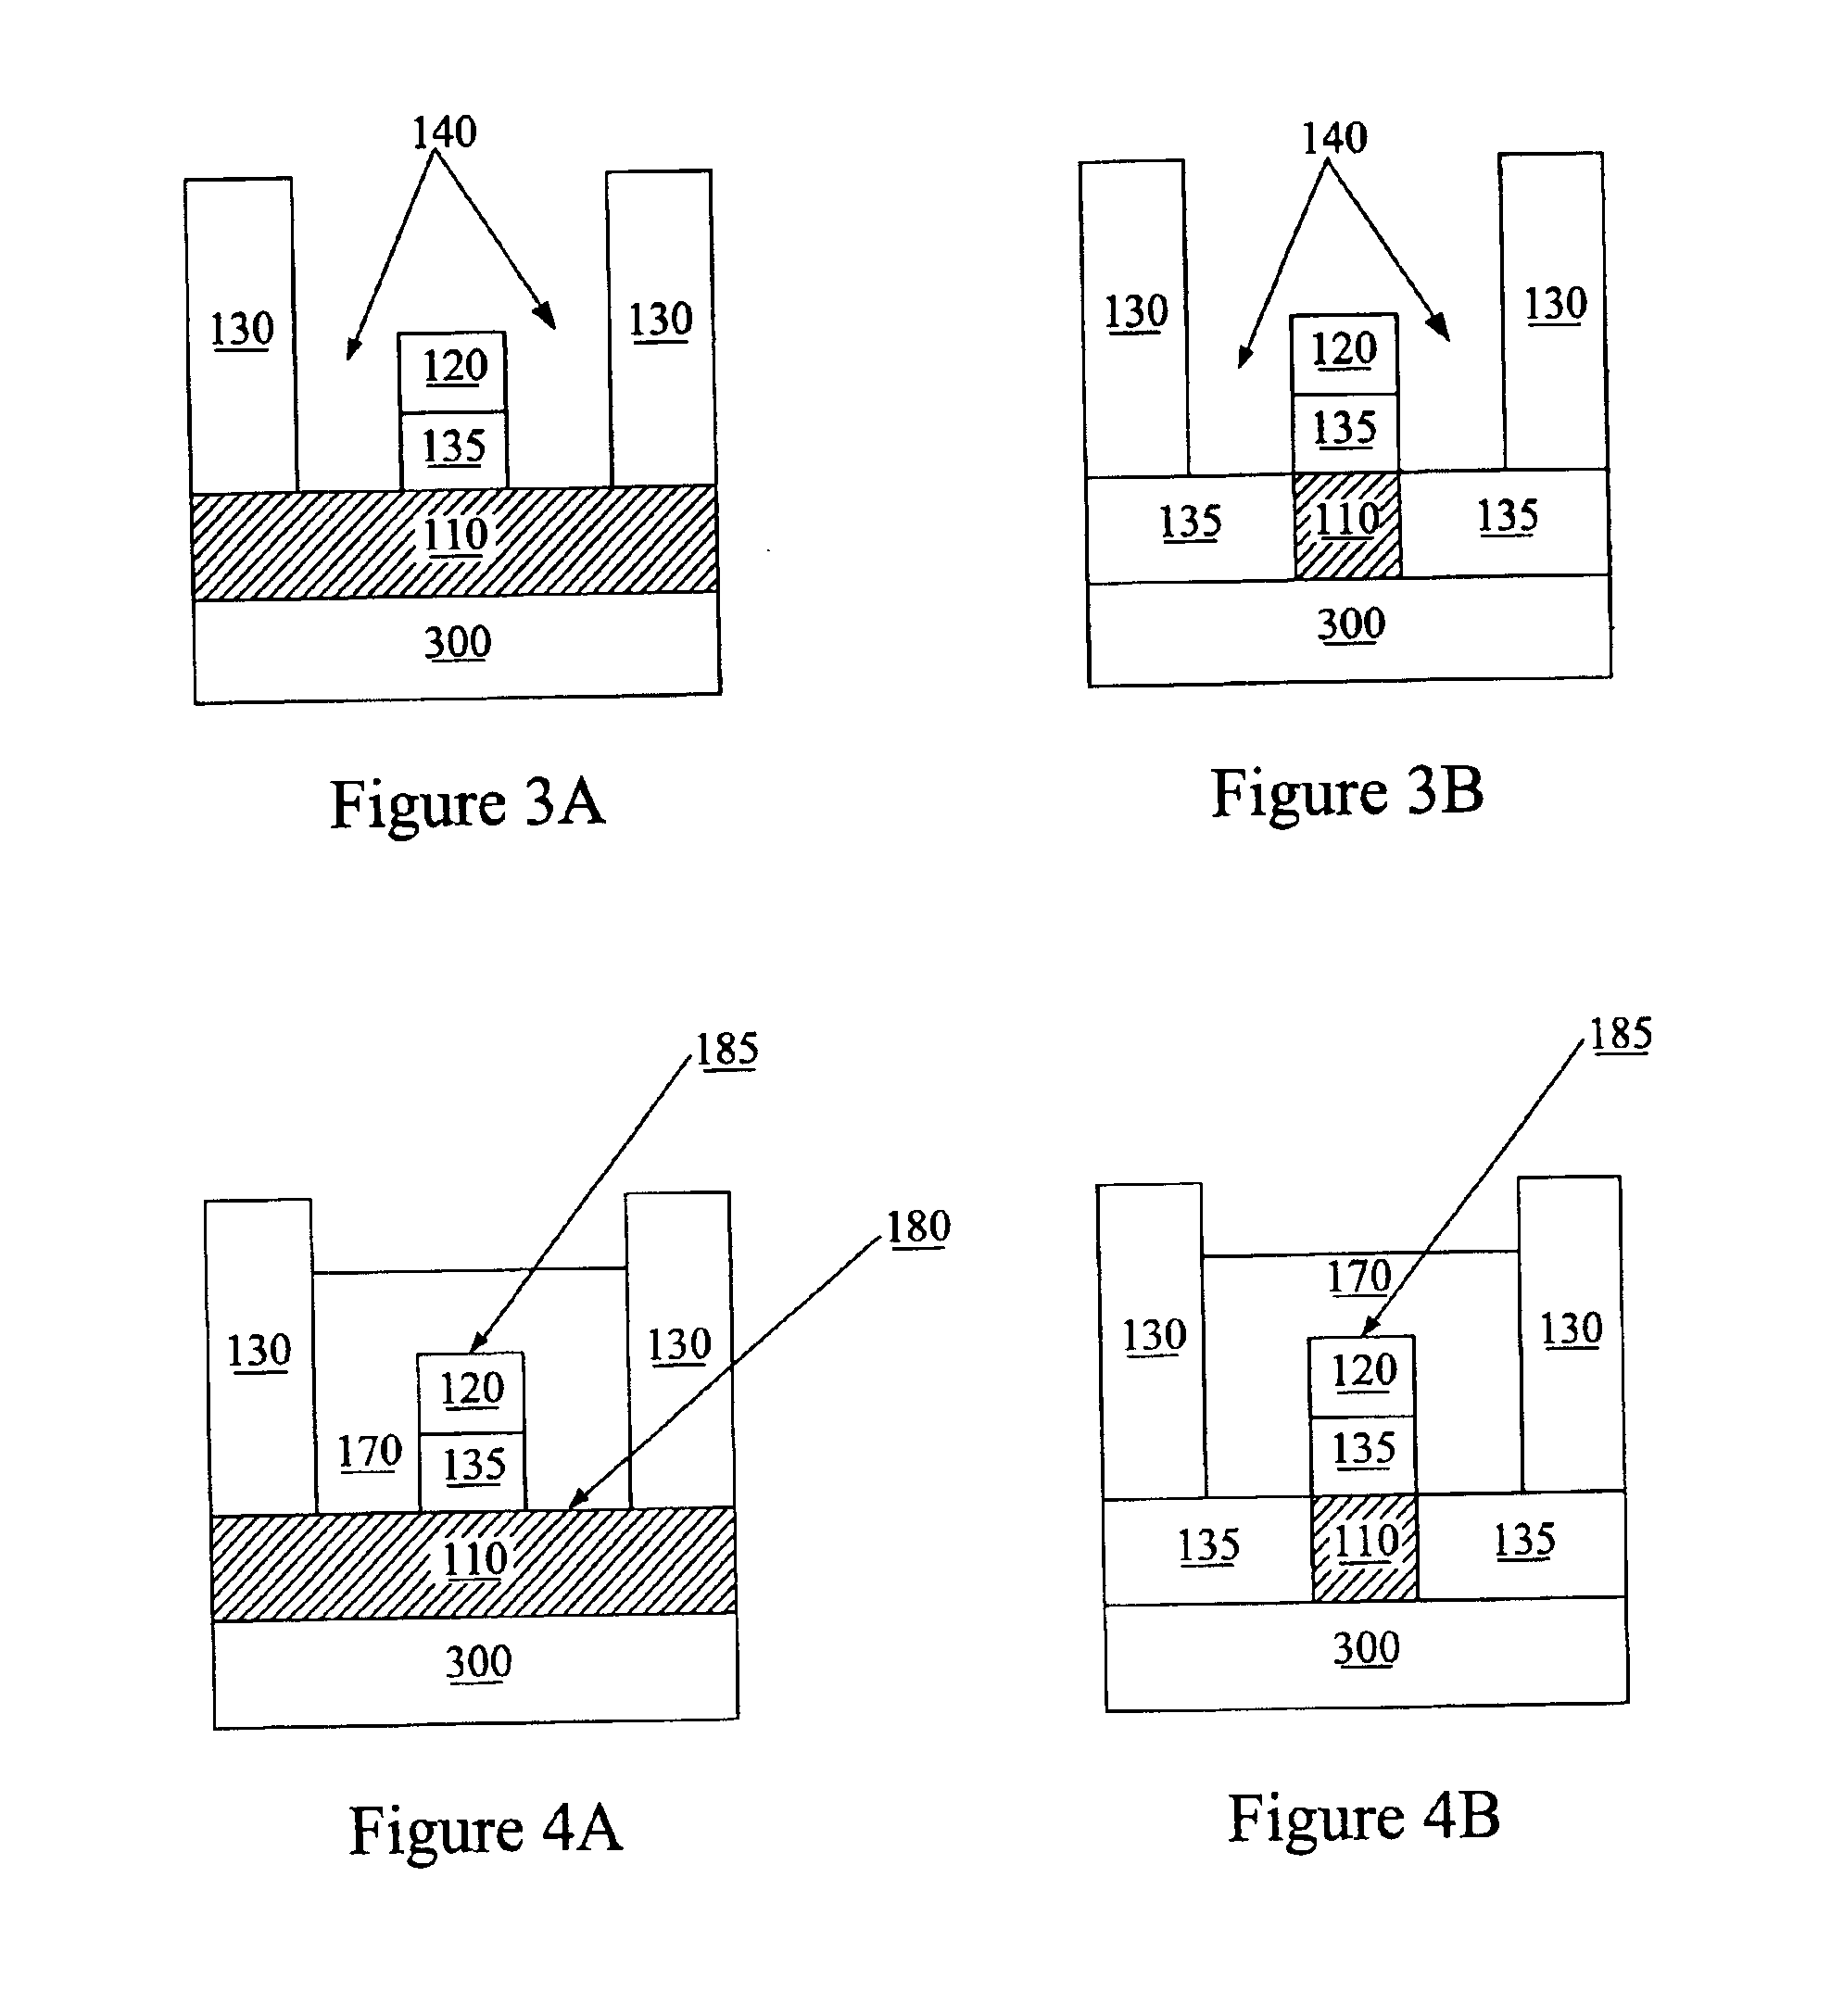 Methods of fabricating crossbar array microelectronic electrochemical cells